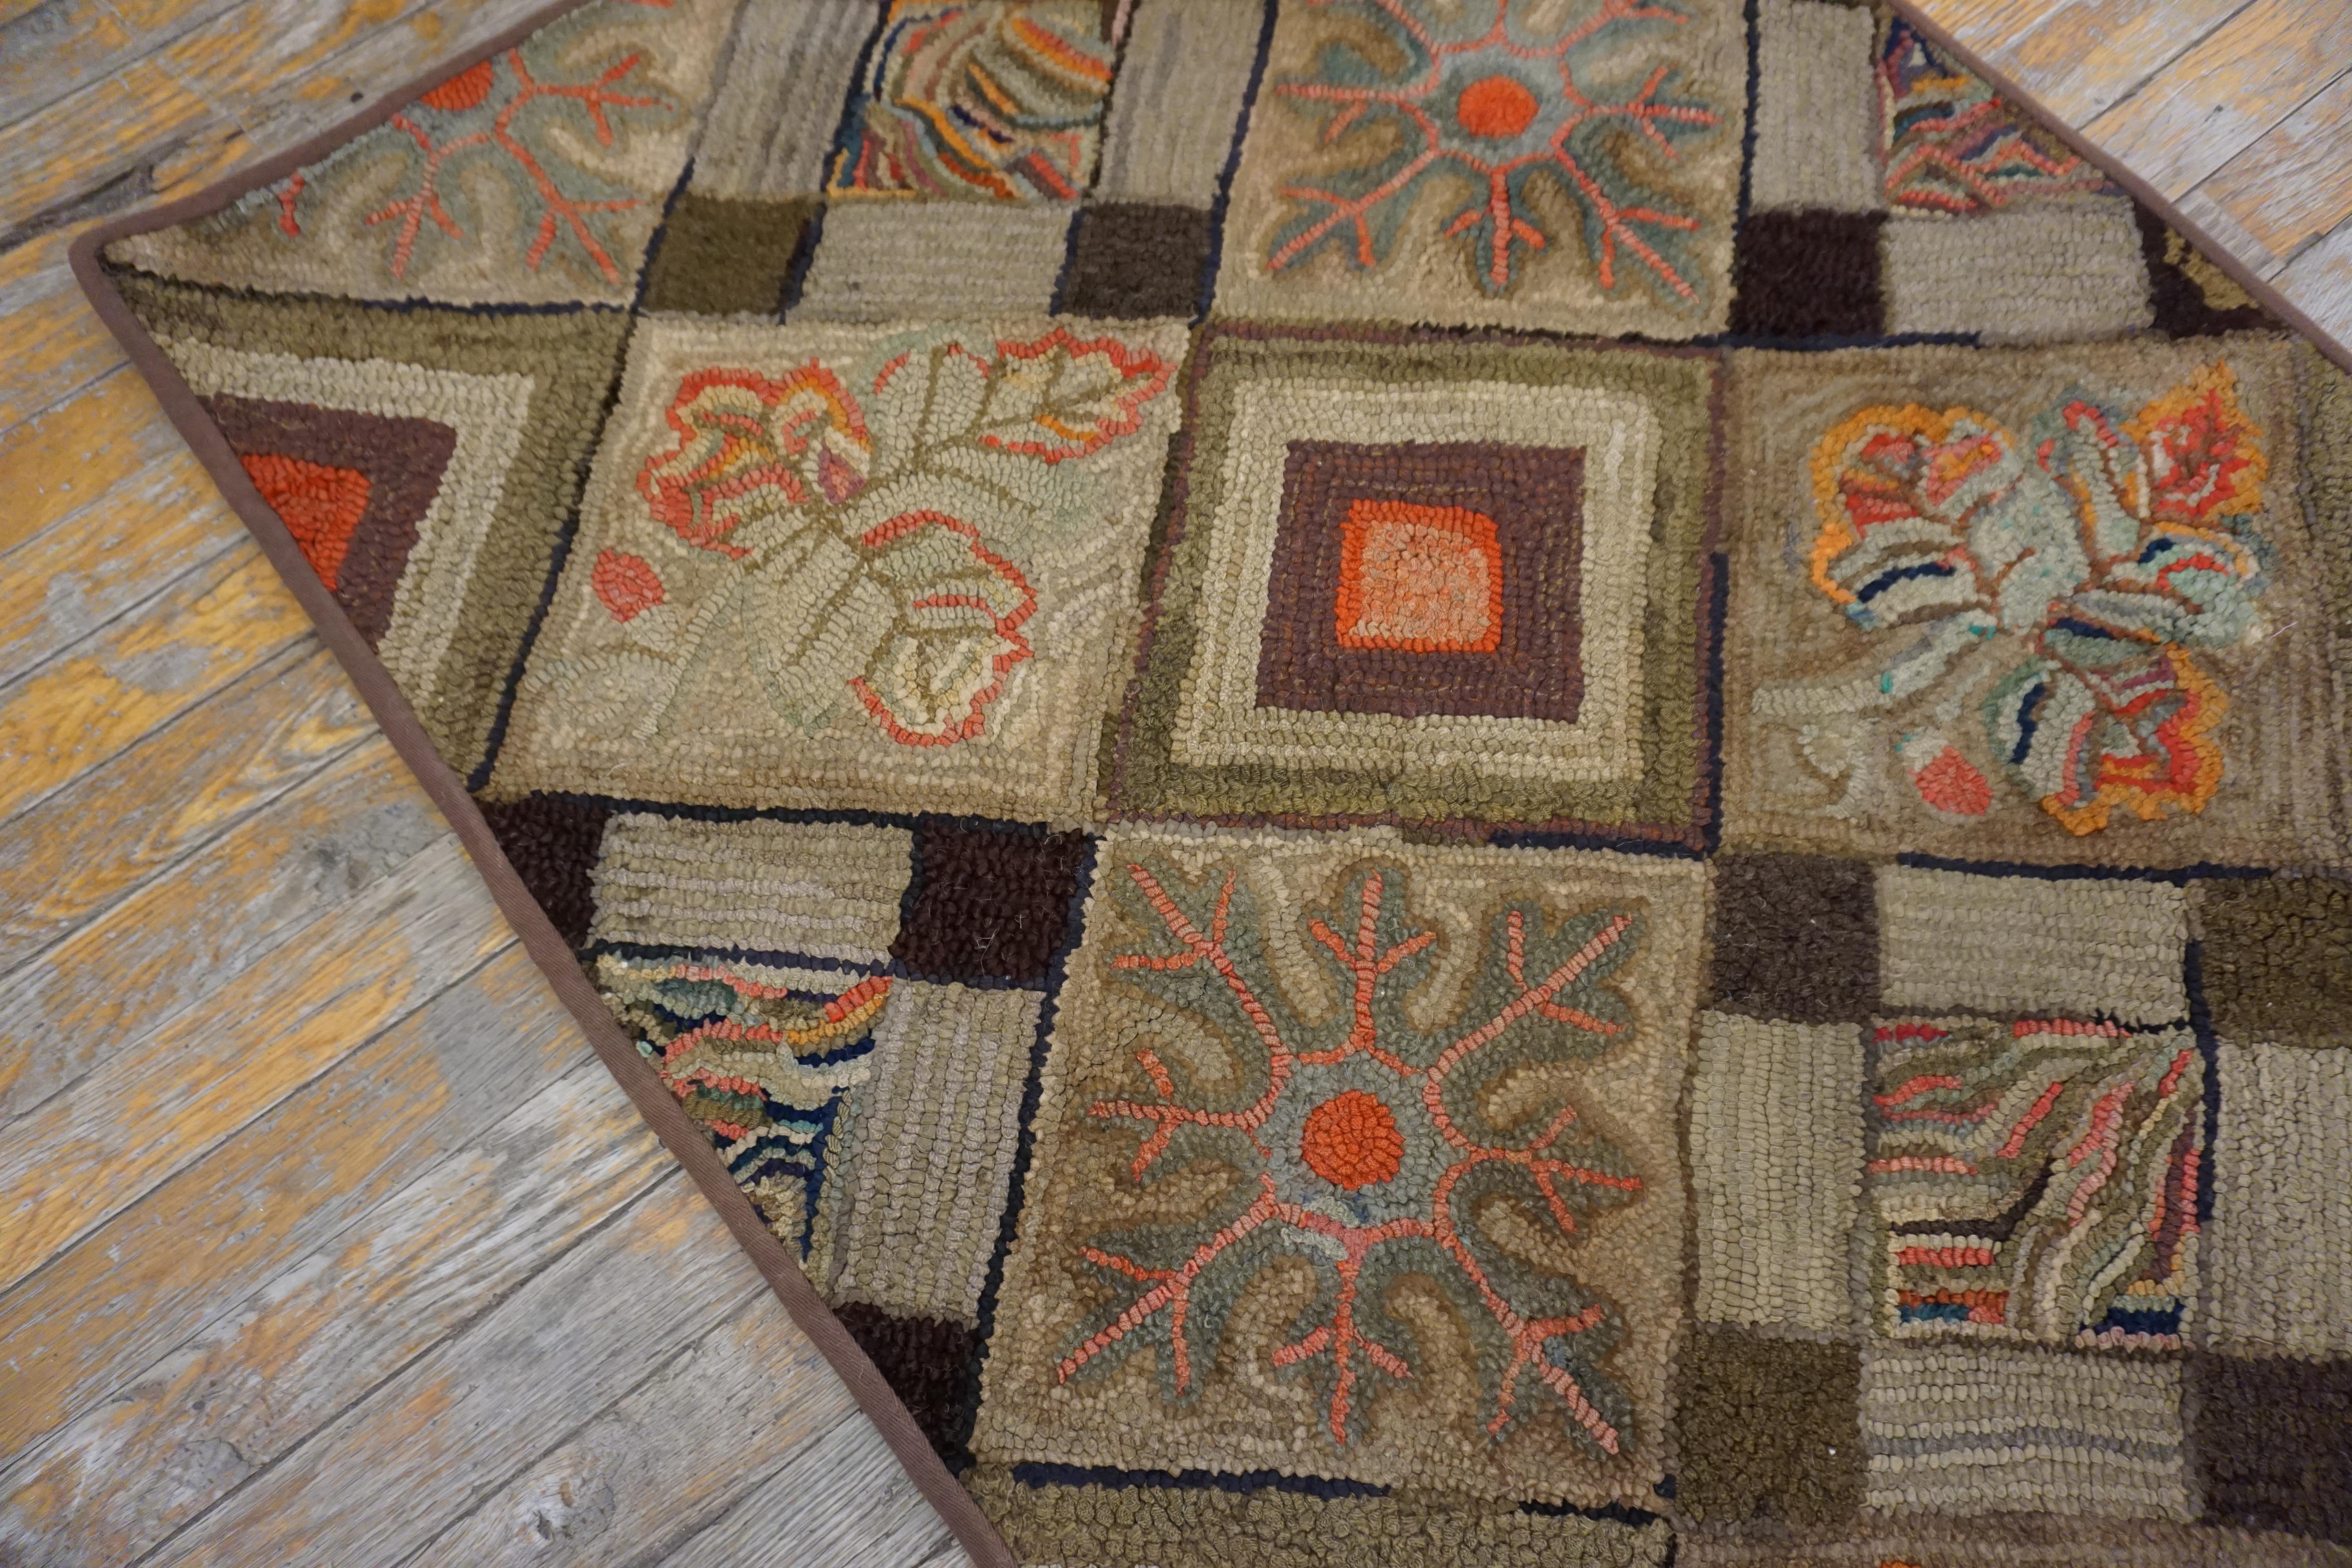 Antique American hooked rug, size: 2.7